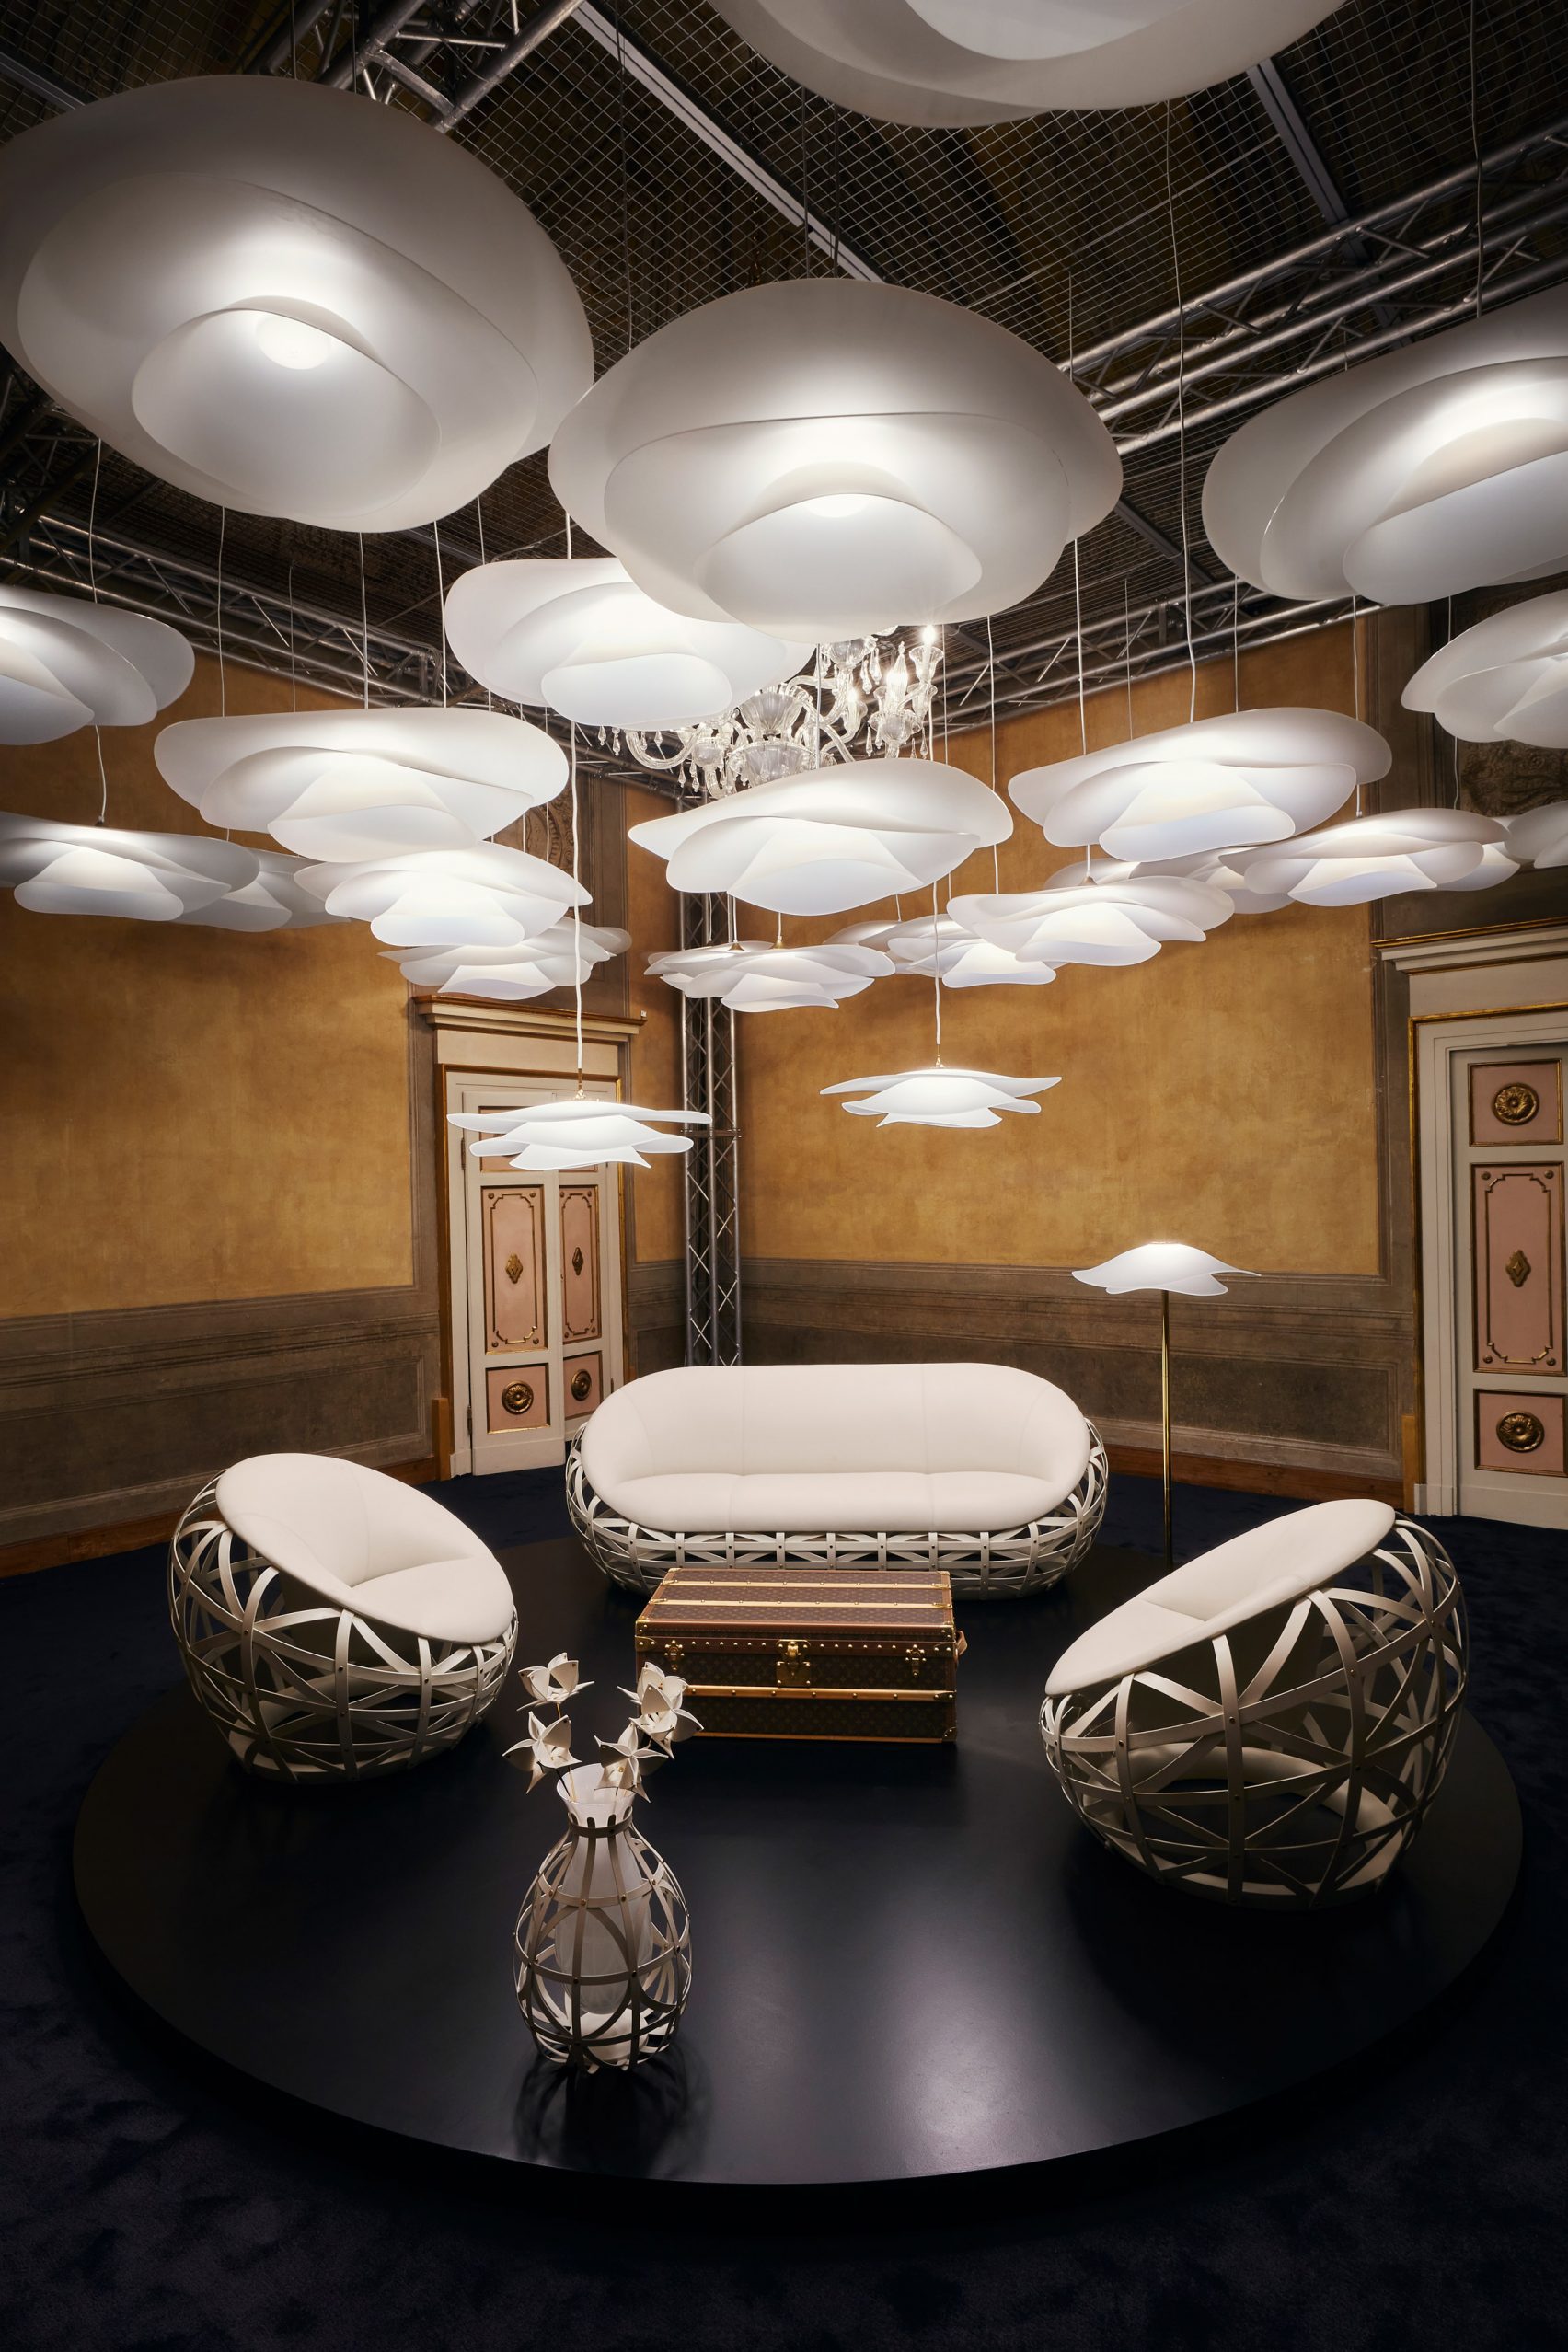 Undulating lamps by Marcel Wanders suspended above seating